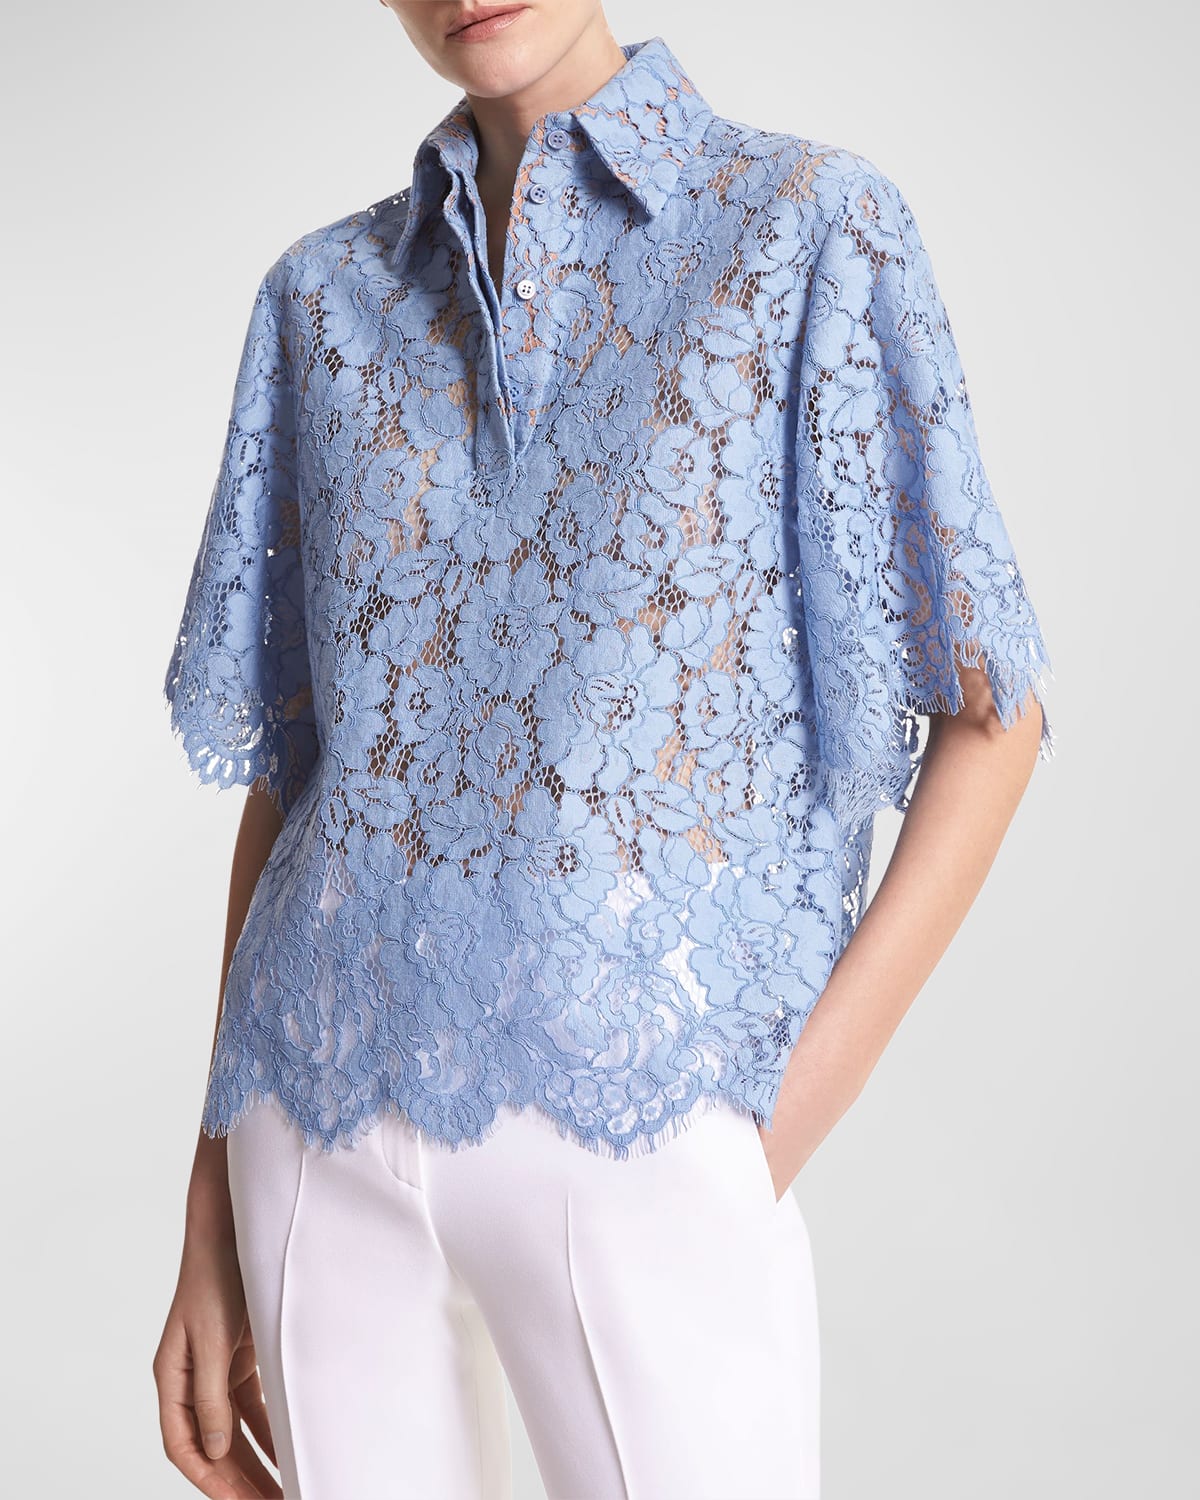 Michael Kors Large Floral Lace Collared Shirt In Coast